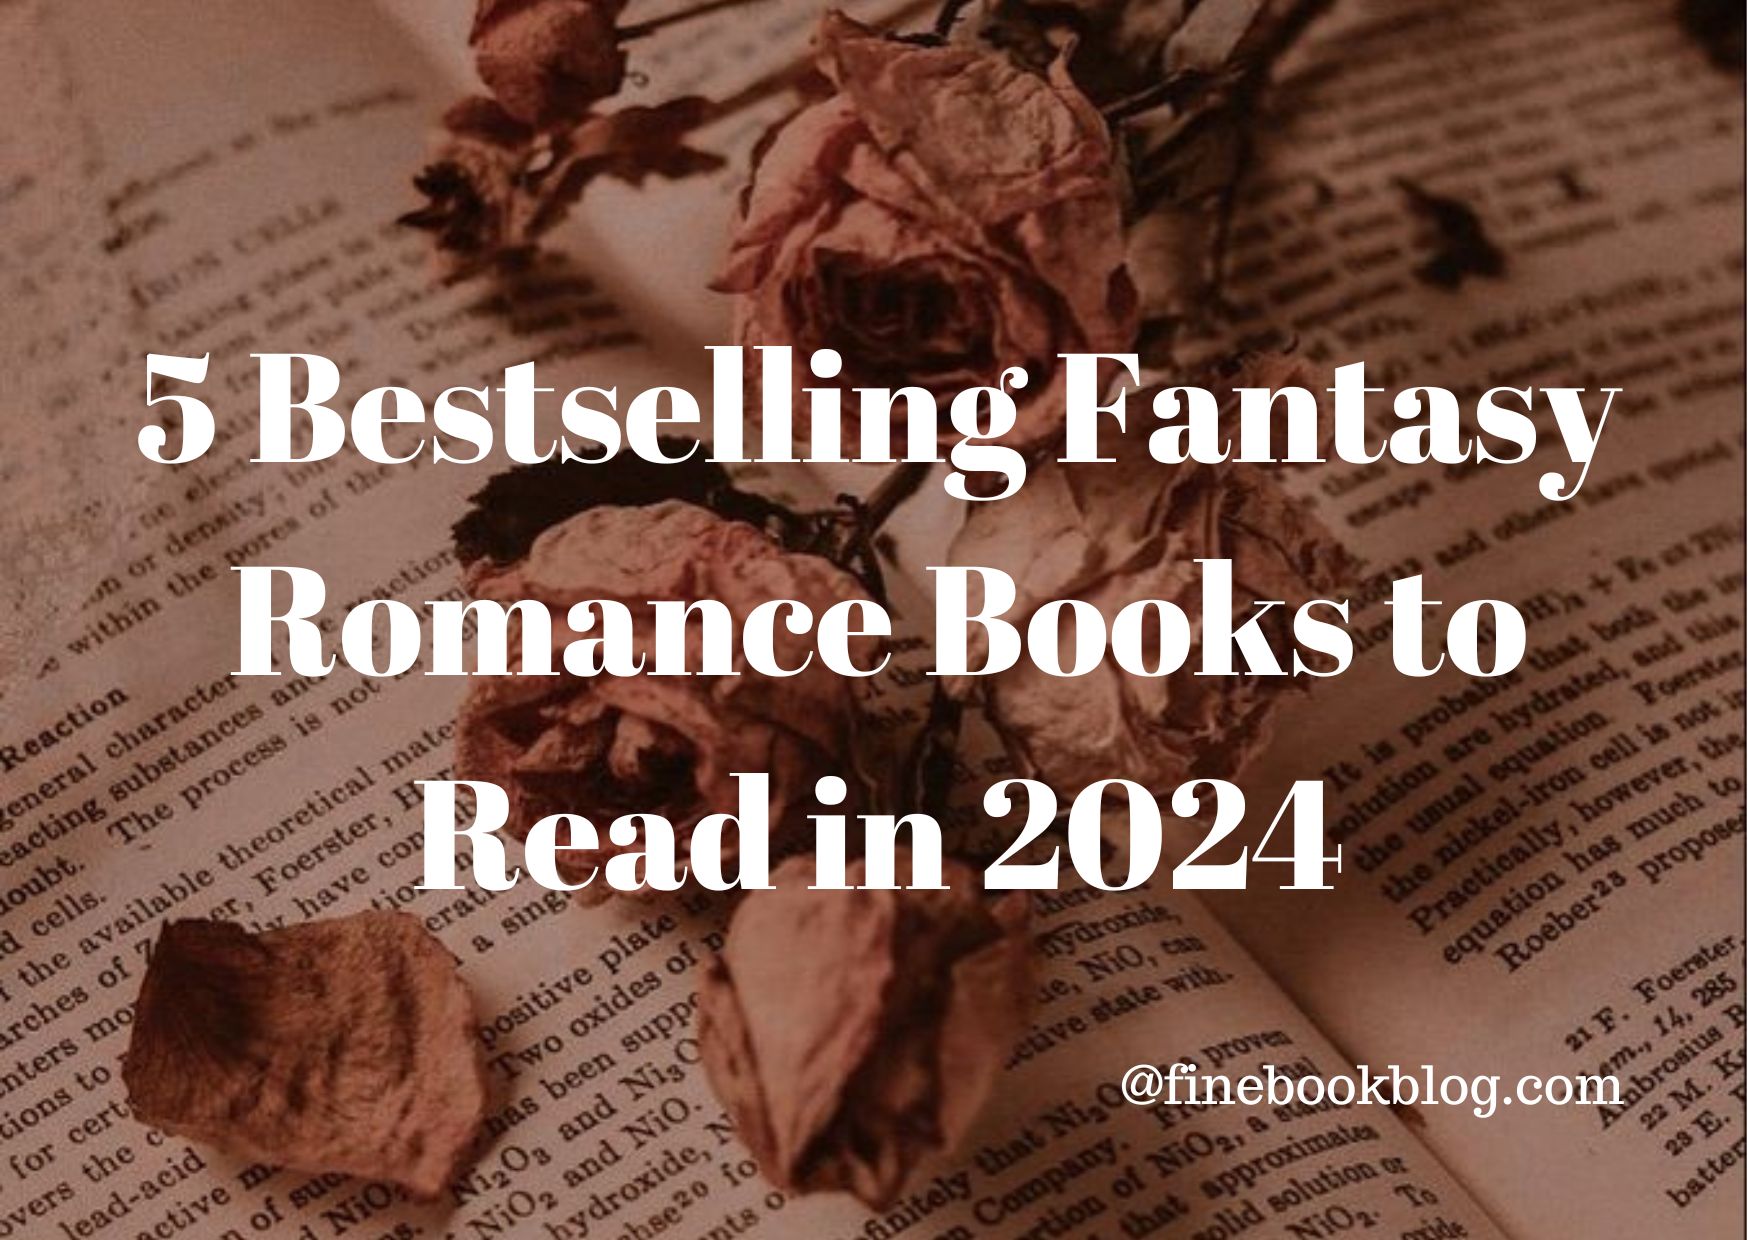 Bestselling-Fantasy-Romance-books-to-read-2024